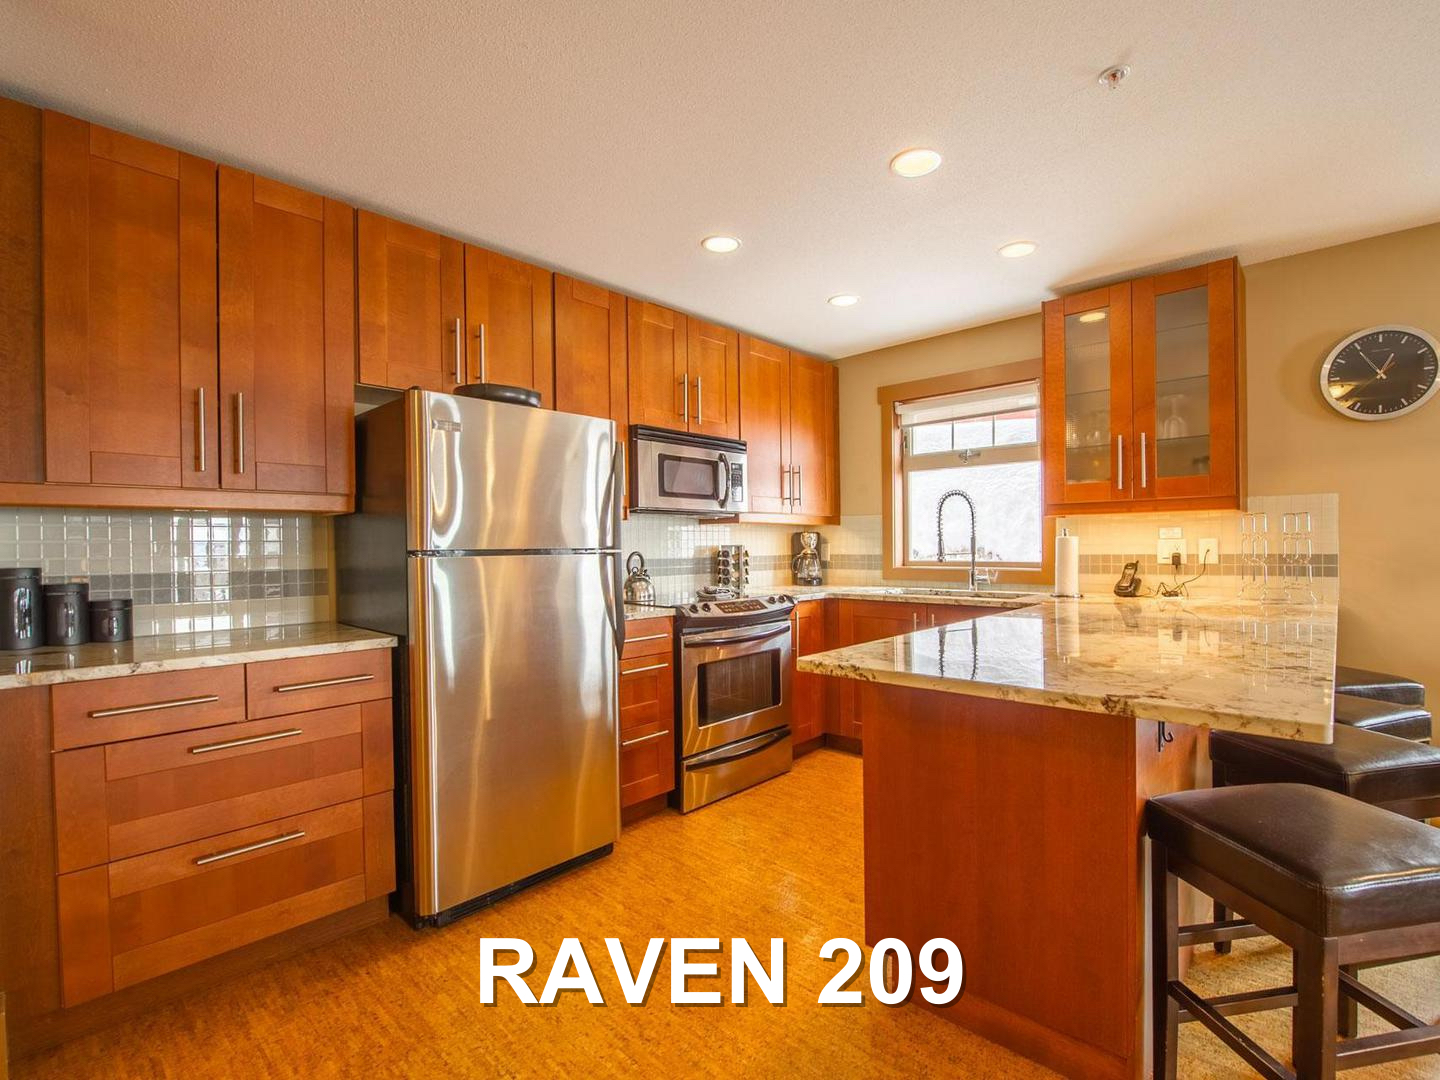 Raven 209 gourmet Kitchen, which is fully equipped with stainless steel fridge, oven, and microwave, and has warm wooden cabinets, hardwood floors, and granite counter tops, located at Big White Ski Resort and managed by Luxury Mountain Vacation Rentals. 